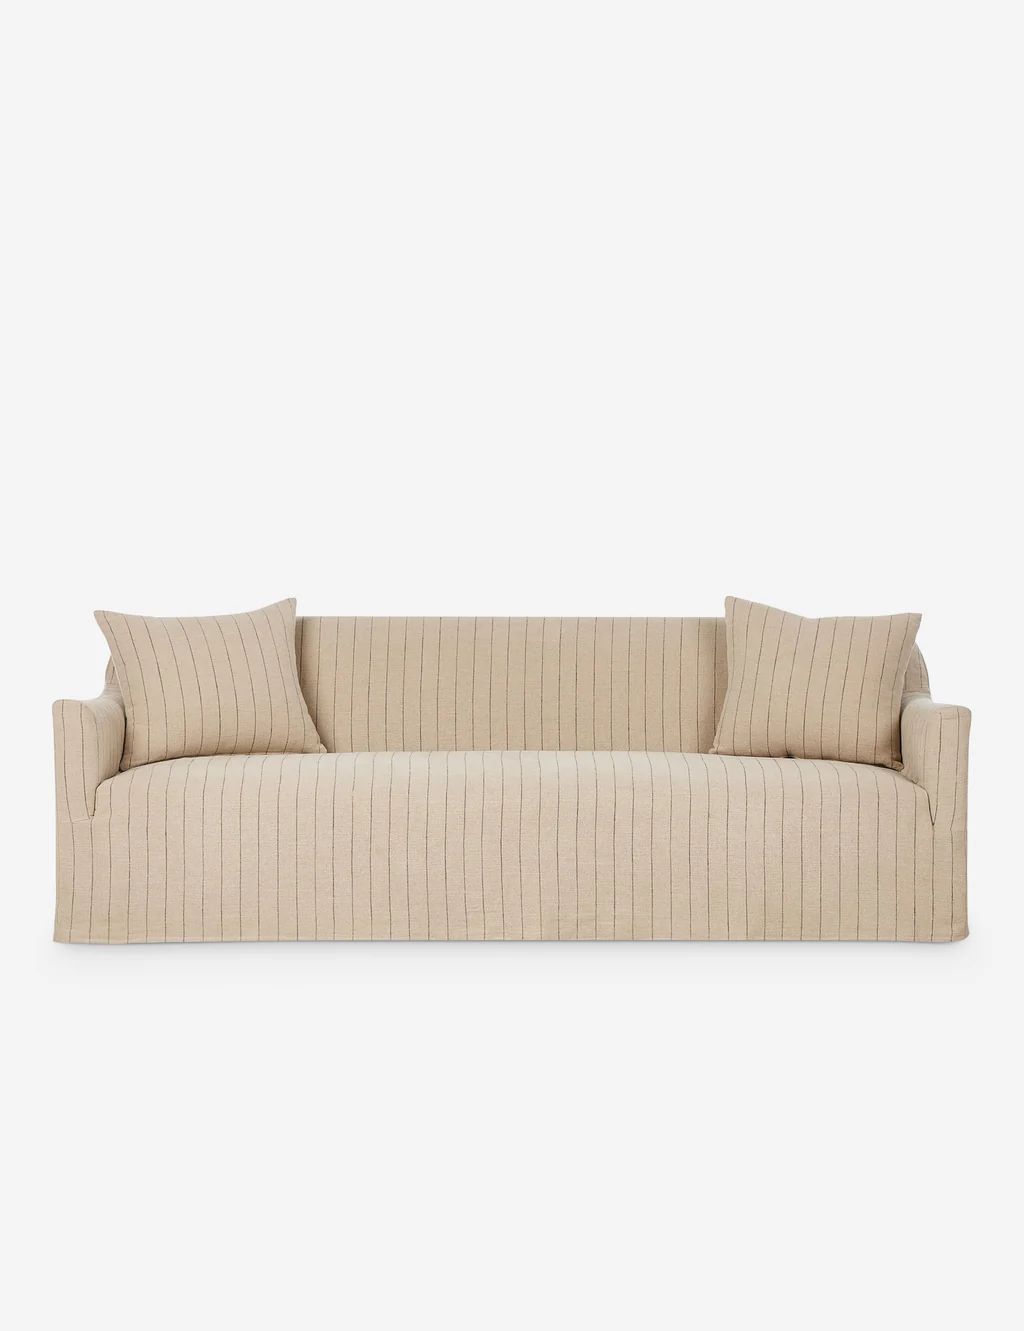 Lowell Slipcover Sofa by Amber Lewis x Four Hands | Lulu and Georgia 